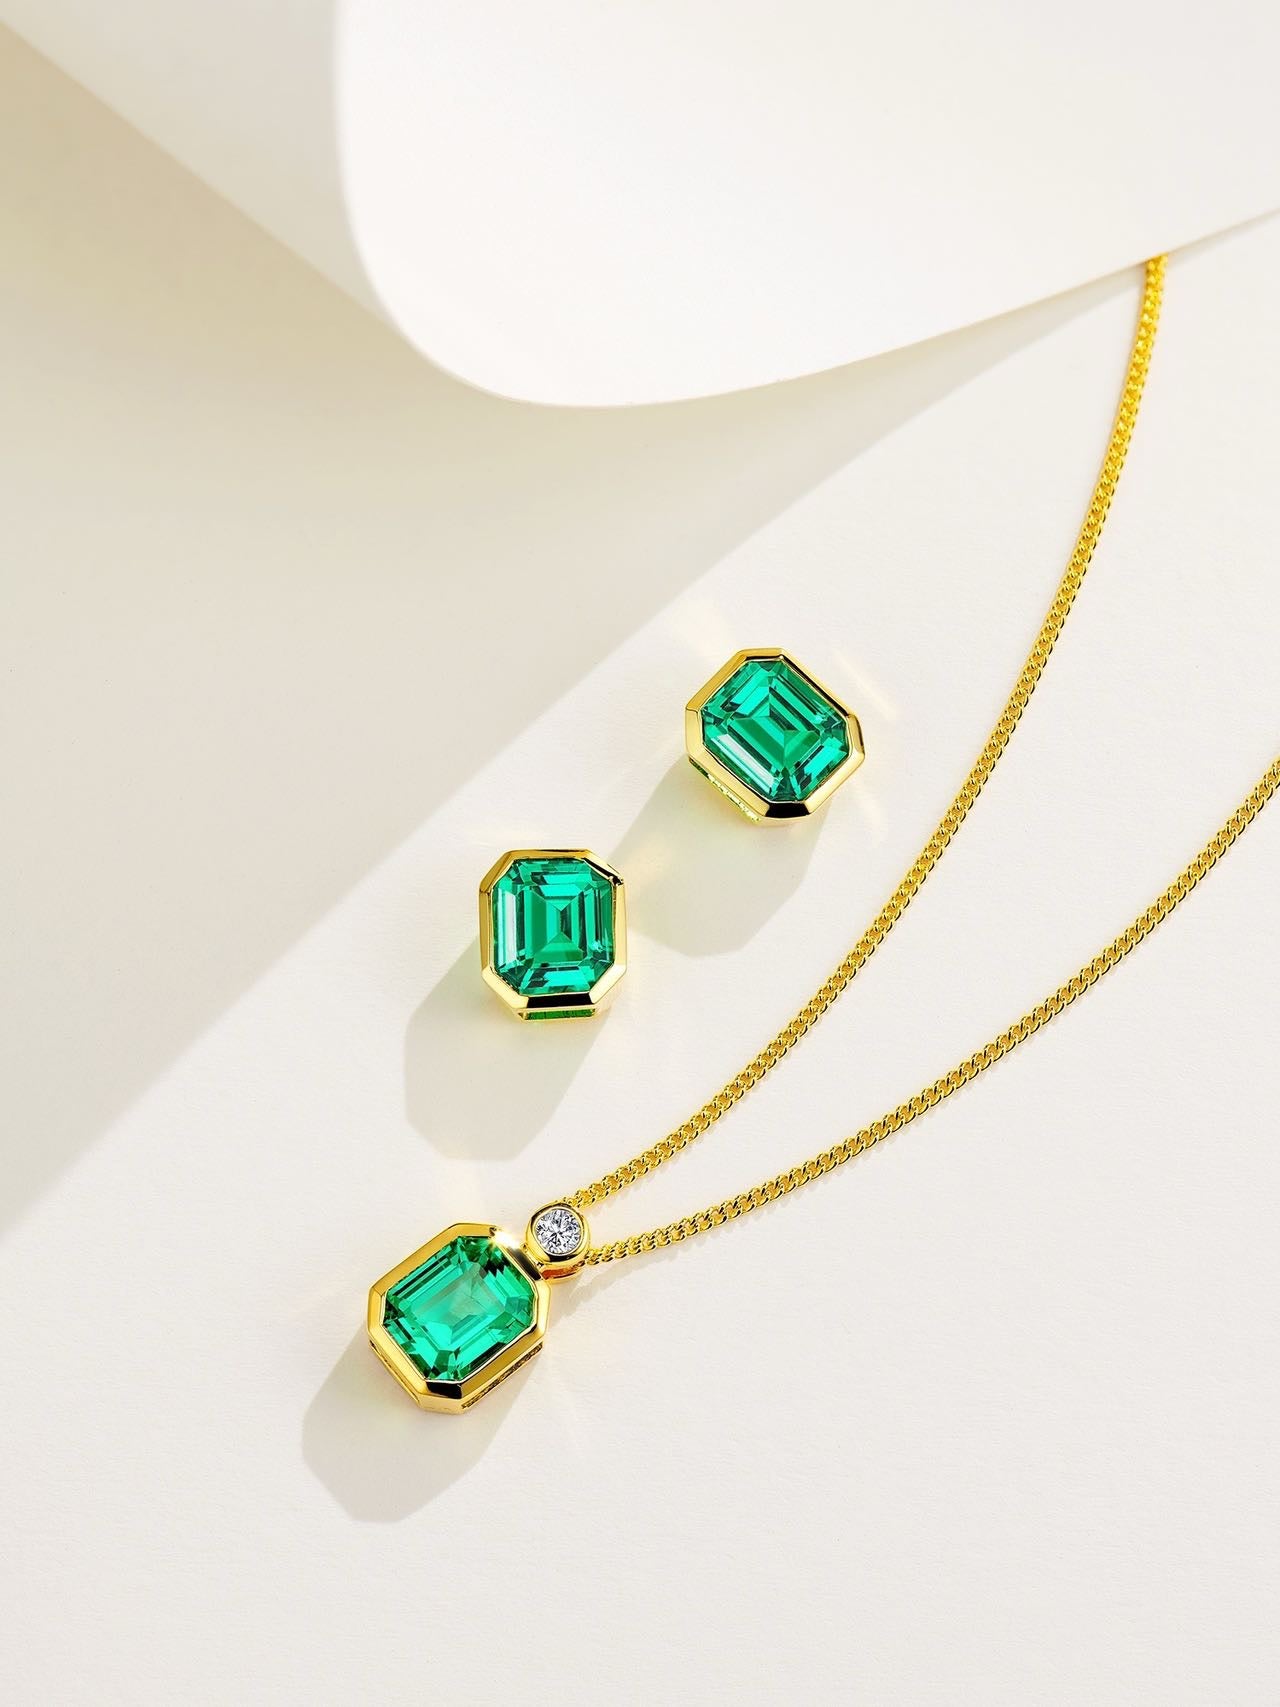 Exquisite 1.3 CT Top-Quality Colombian Emerald Necklace&Earrings | Elegant Gift for Her